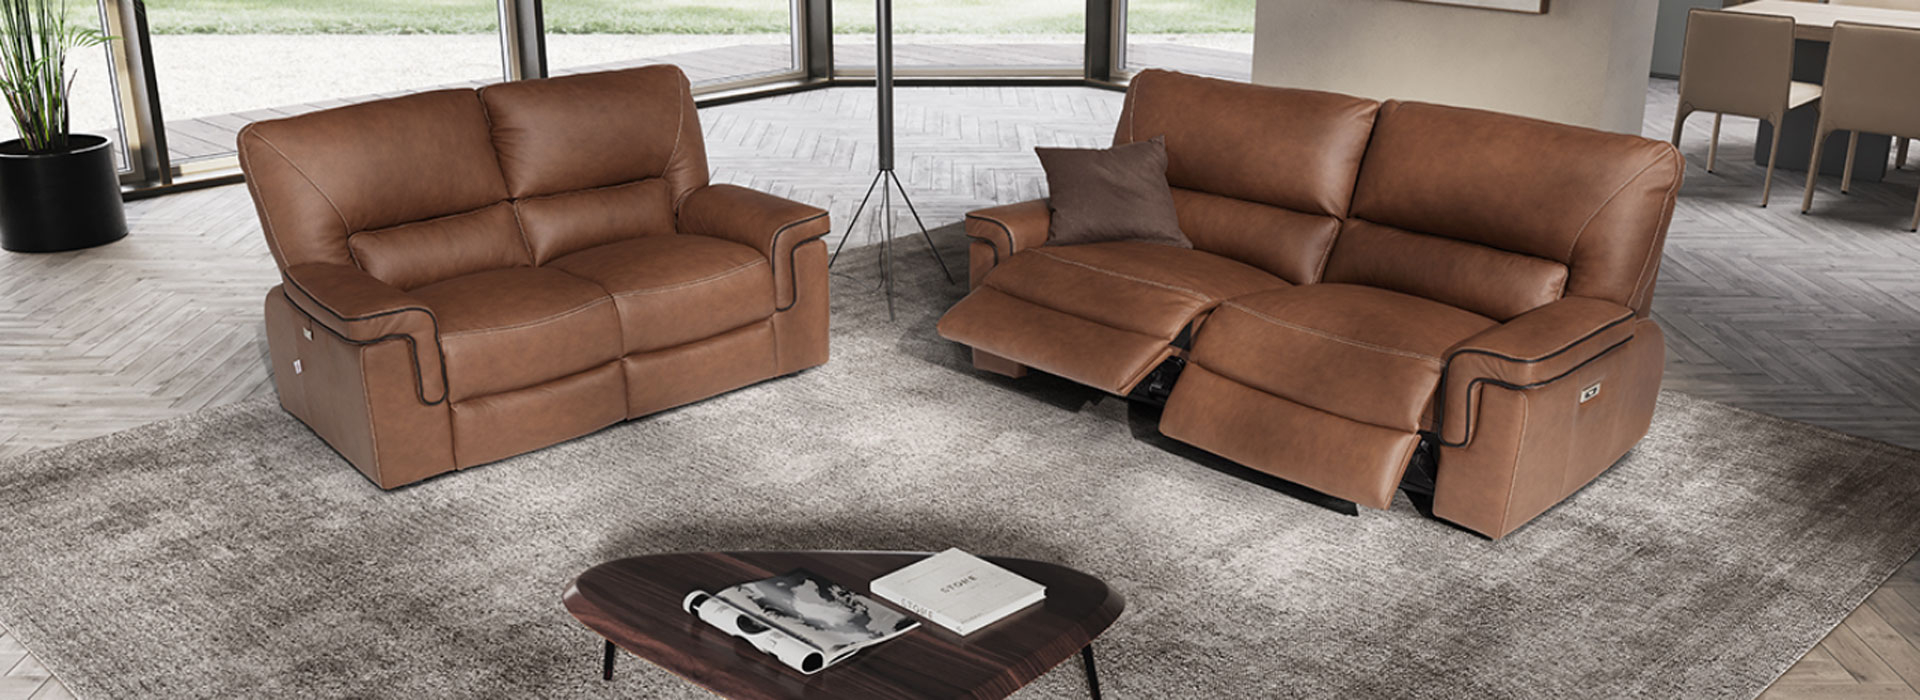 Legend Manual Recliner Armchair - Leather Or Fabric